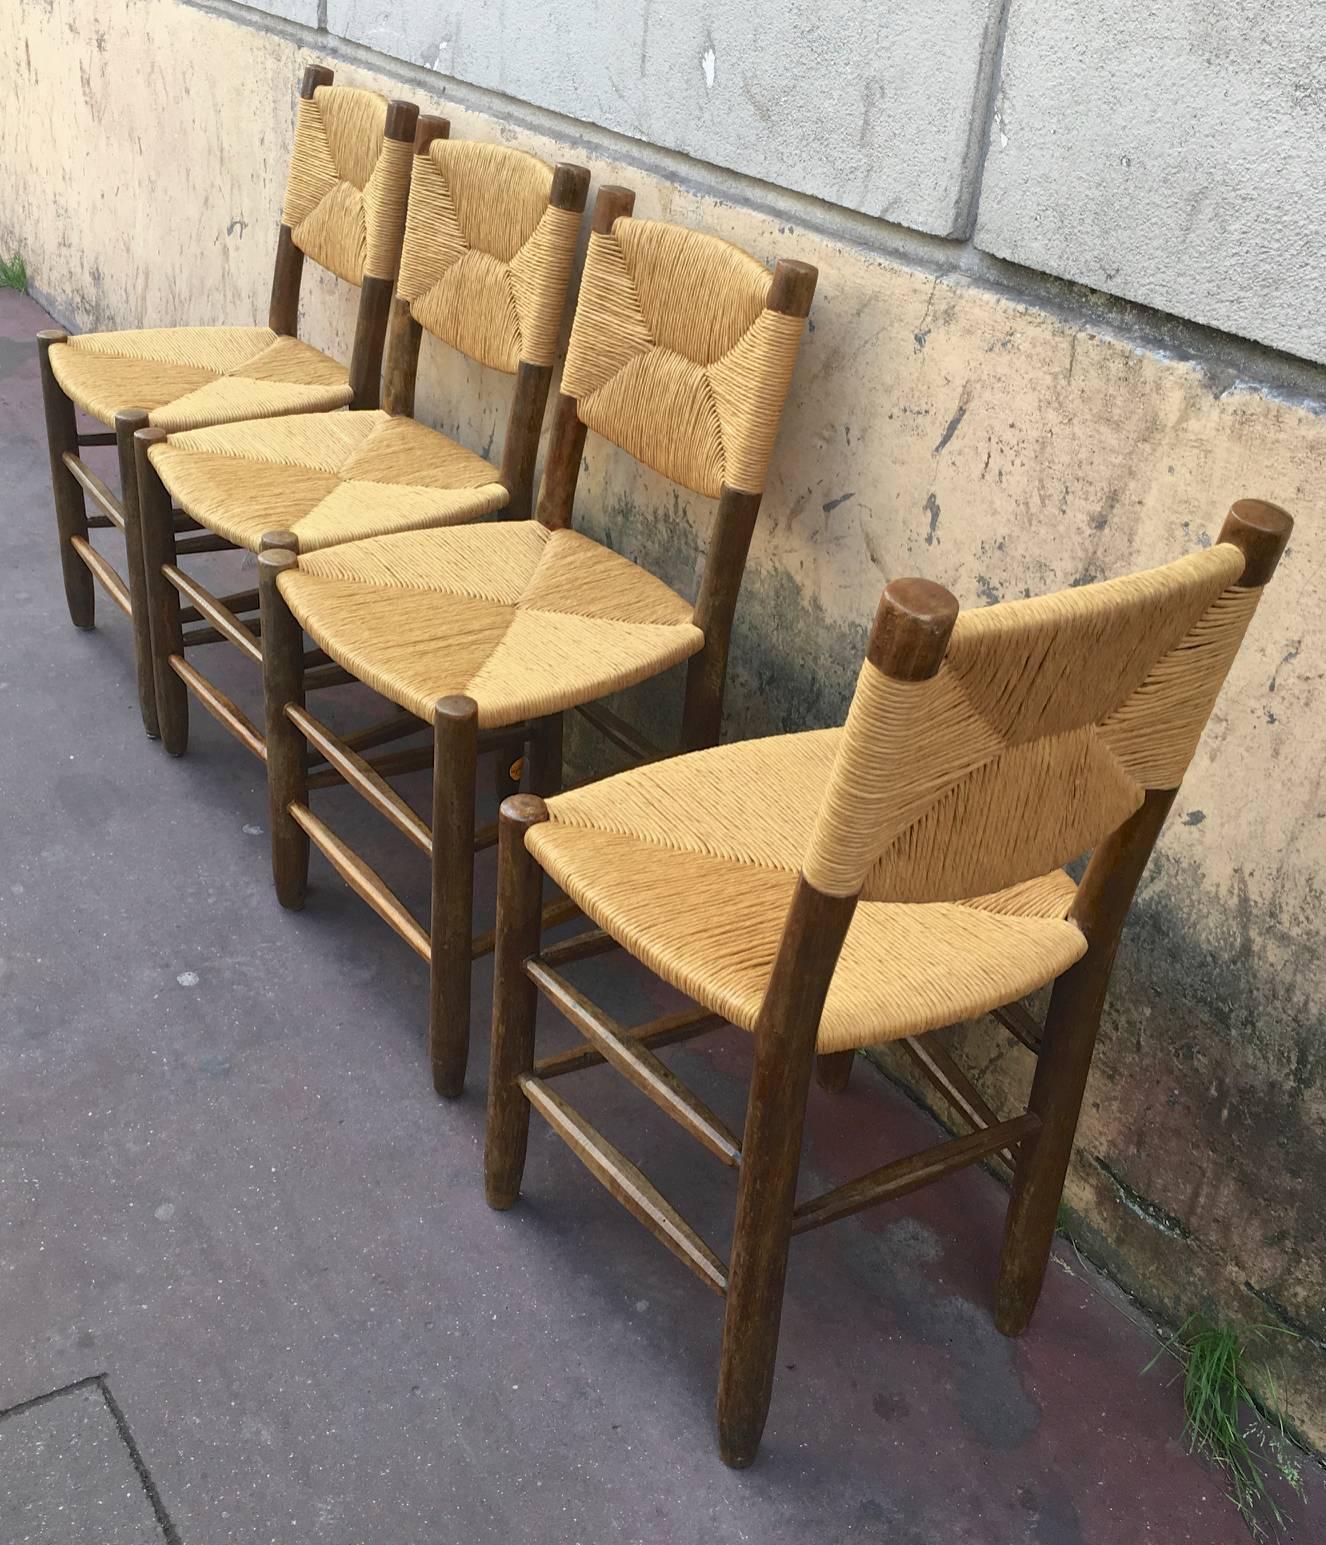 Charlotte Perriand set of four rush chairs, model Bauche in good vintage condition.